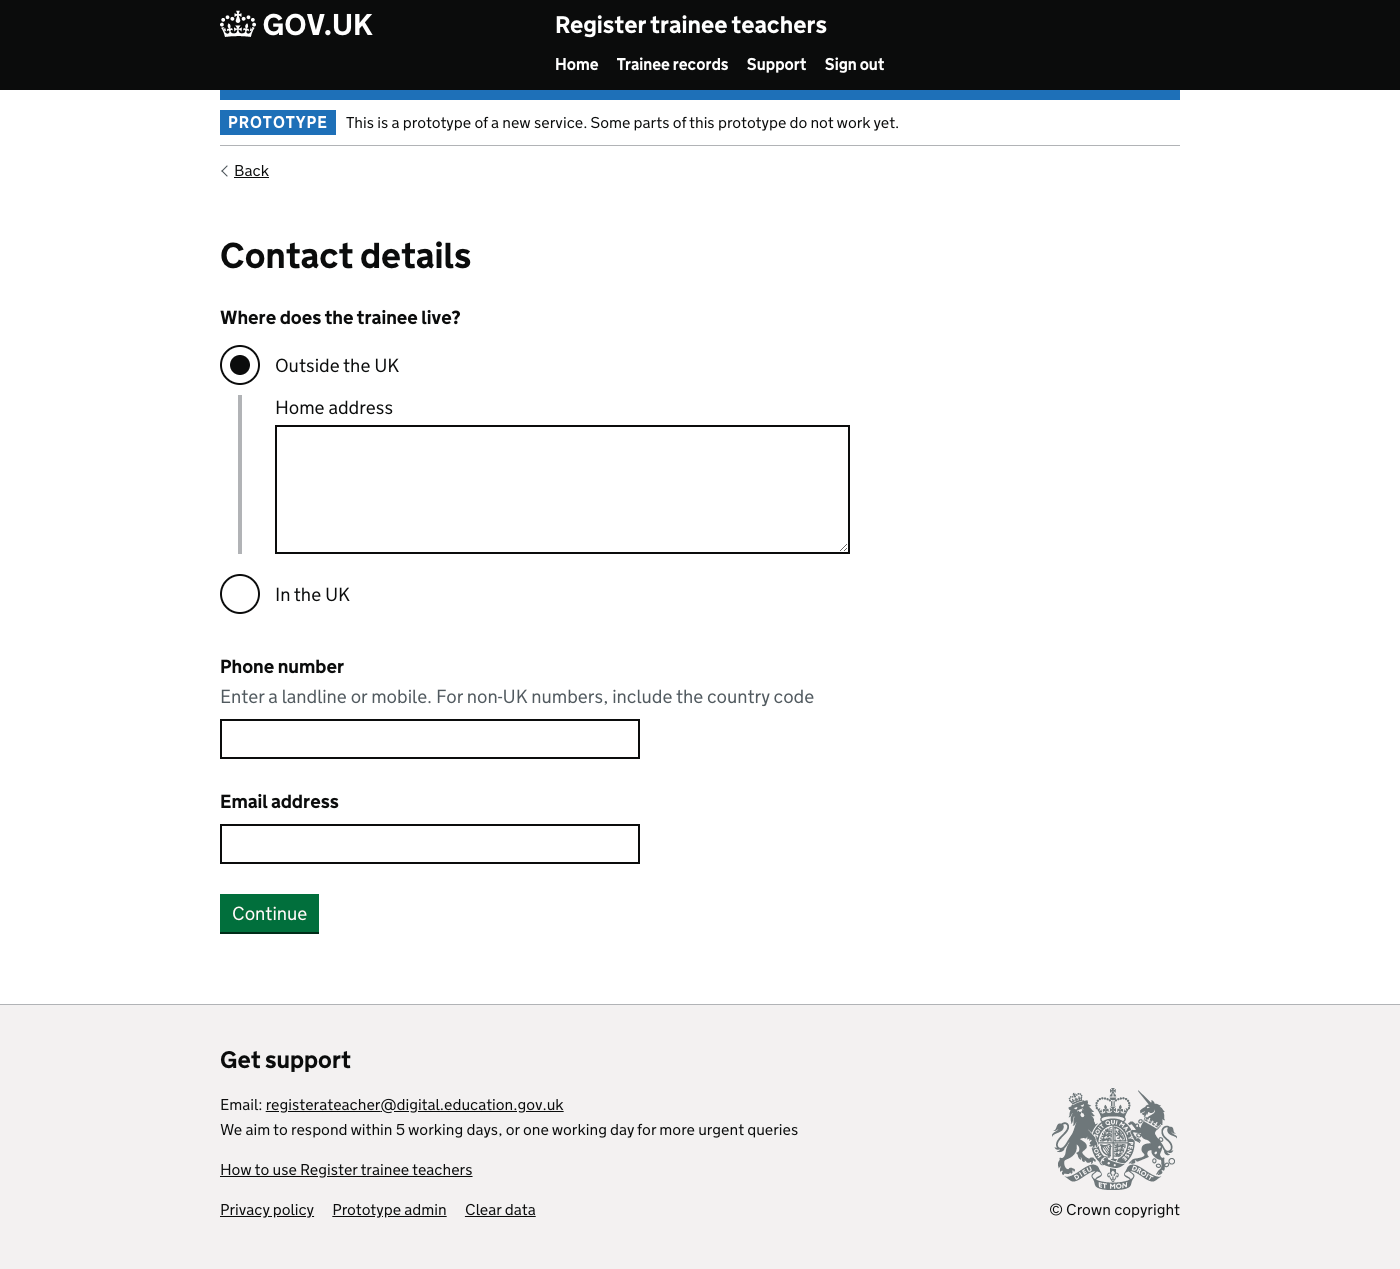 Screenshot of Contact details - Outside the UK